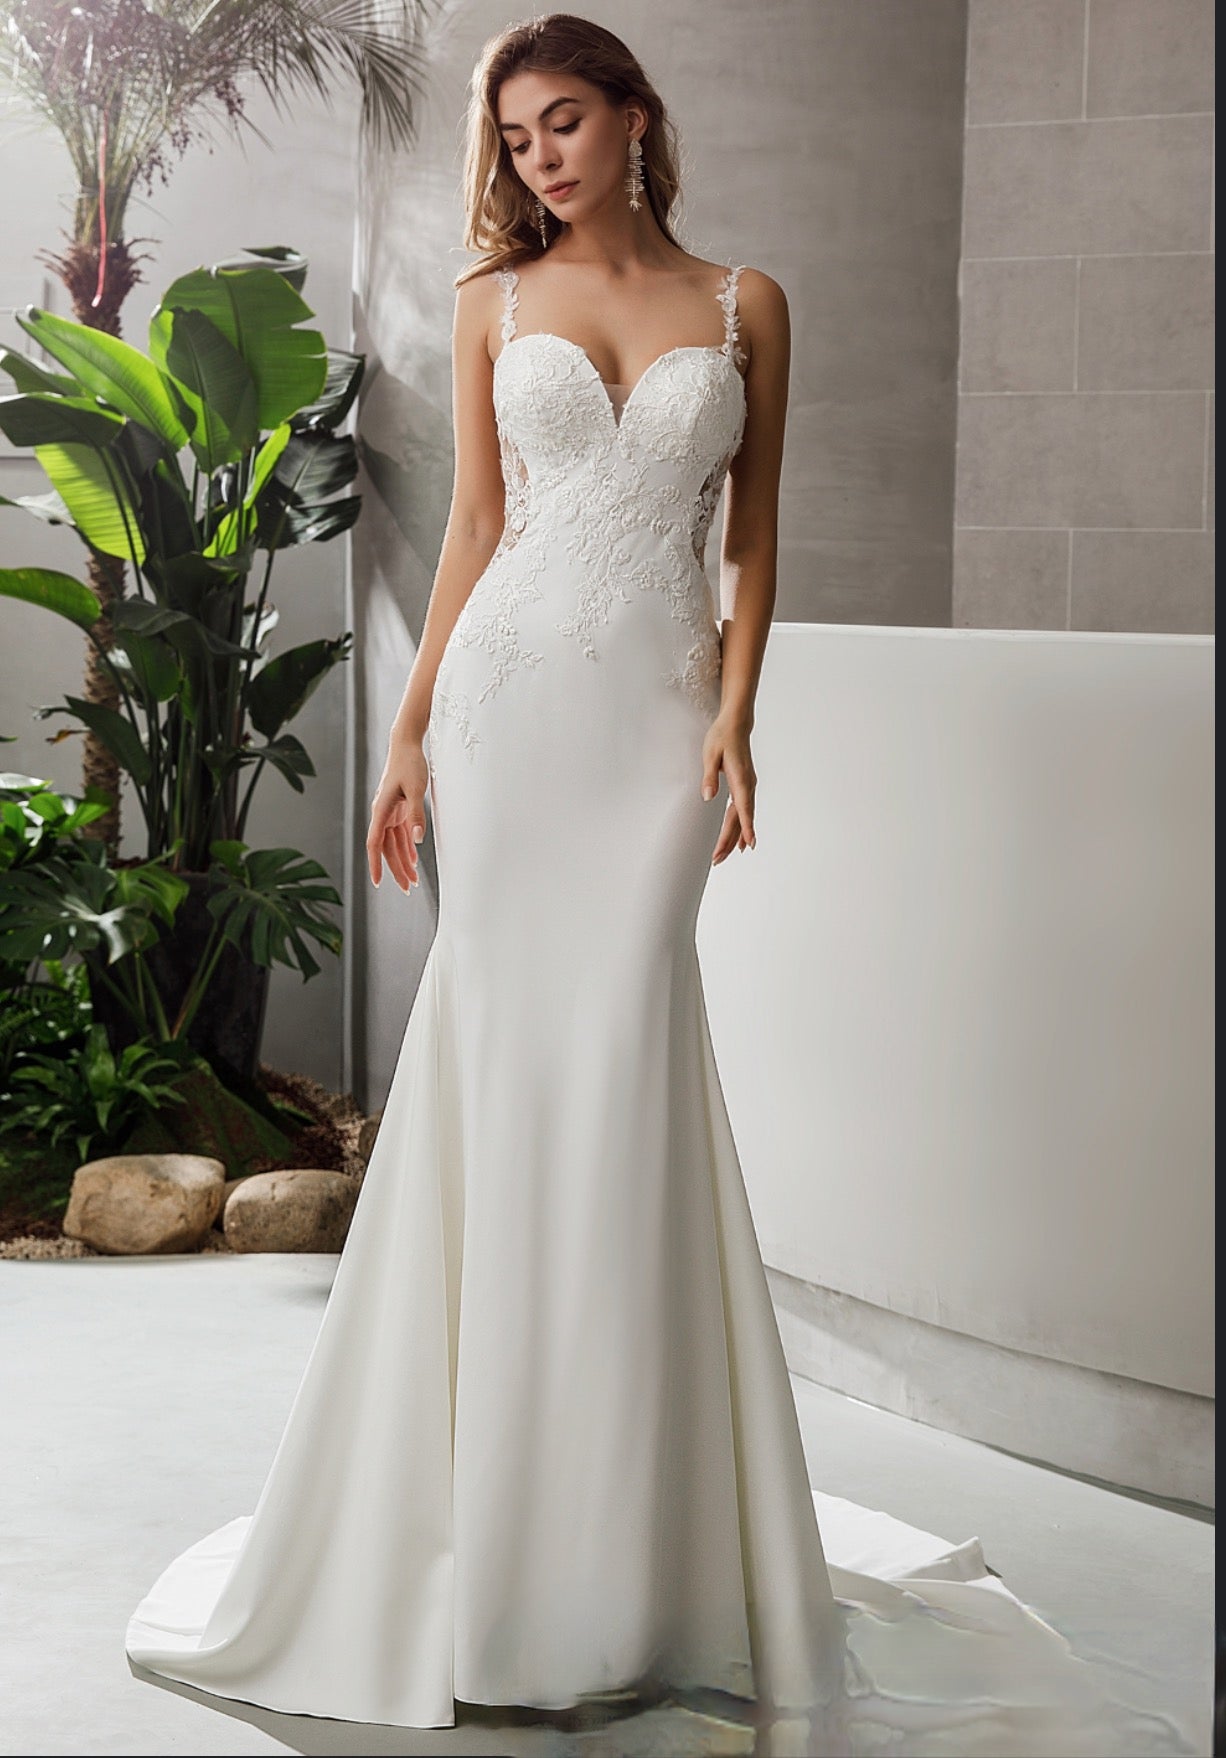 Fit-and-Flare Wedding Dress with Textured Floral Lace - LE1144